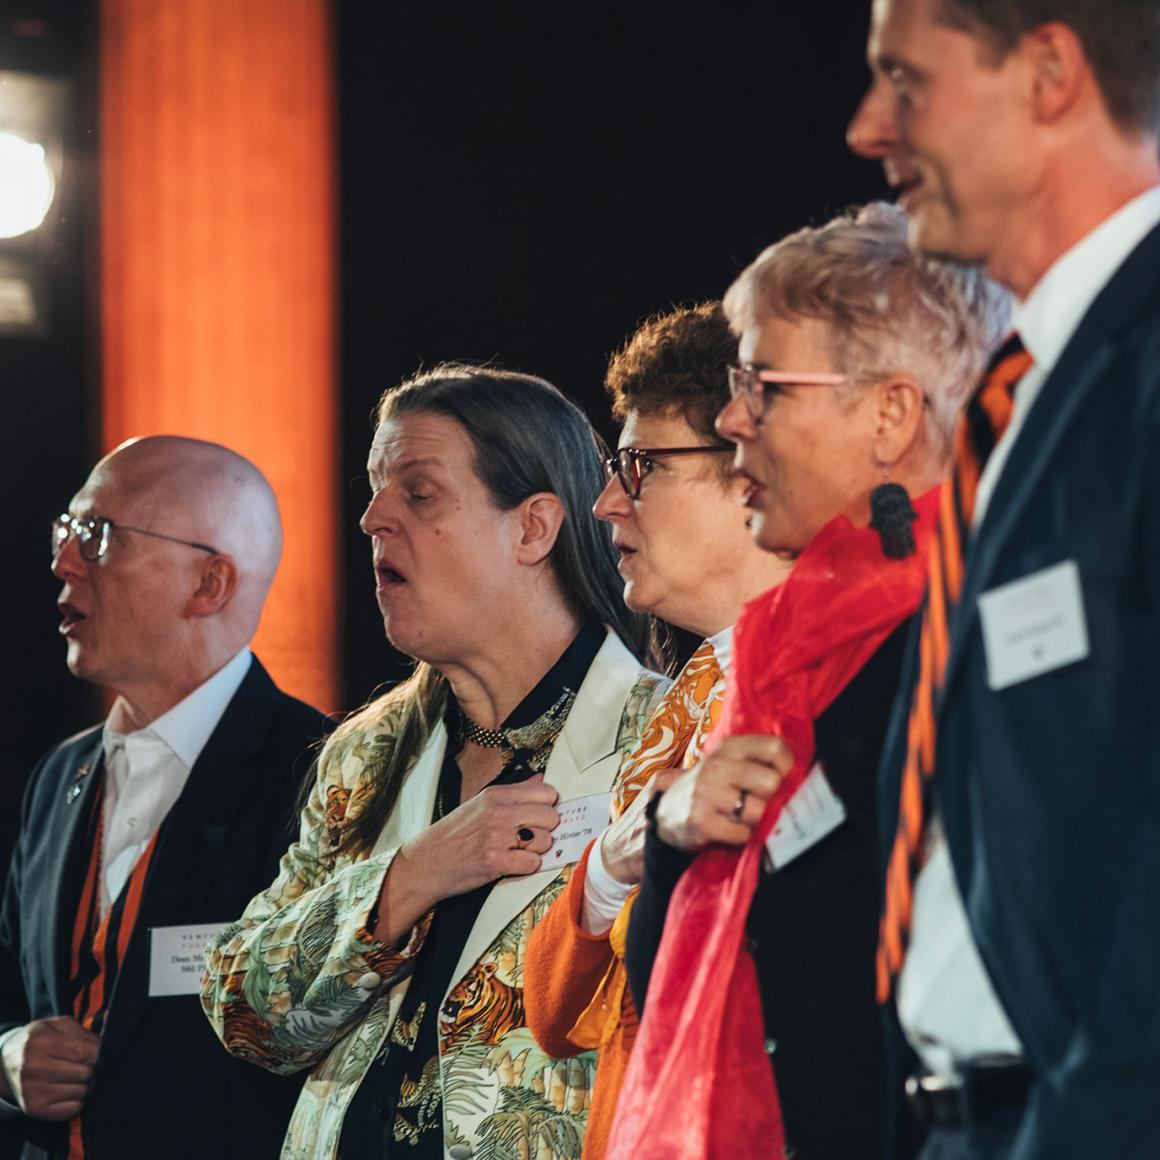 Dean Menegas ’83 and members of the Princeton Association of the United Kingdom led singing of “Old Nassau.”